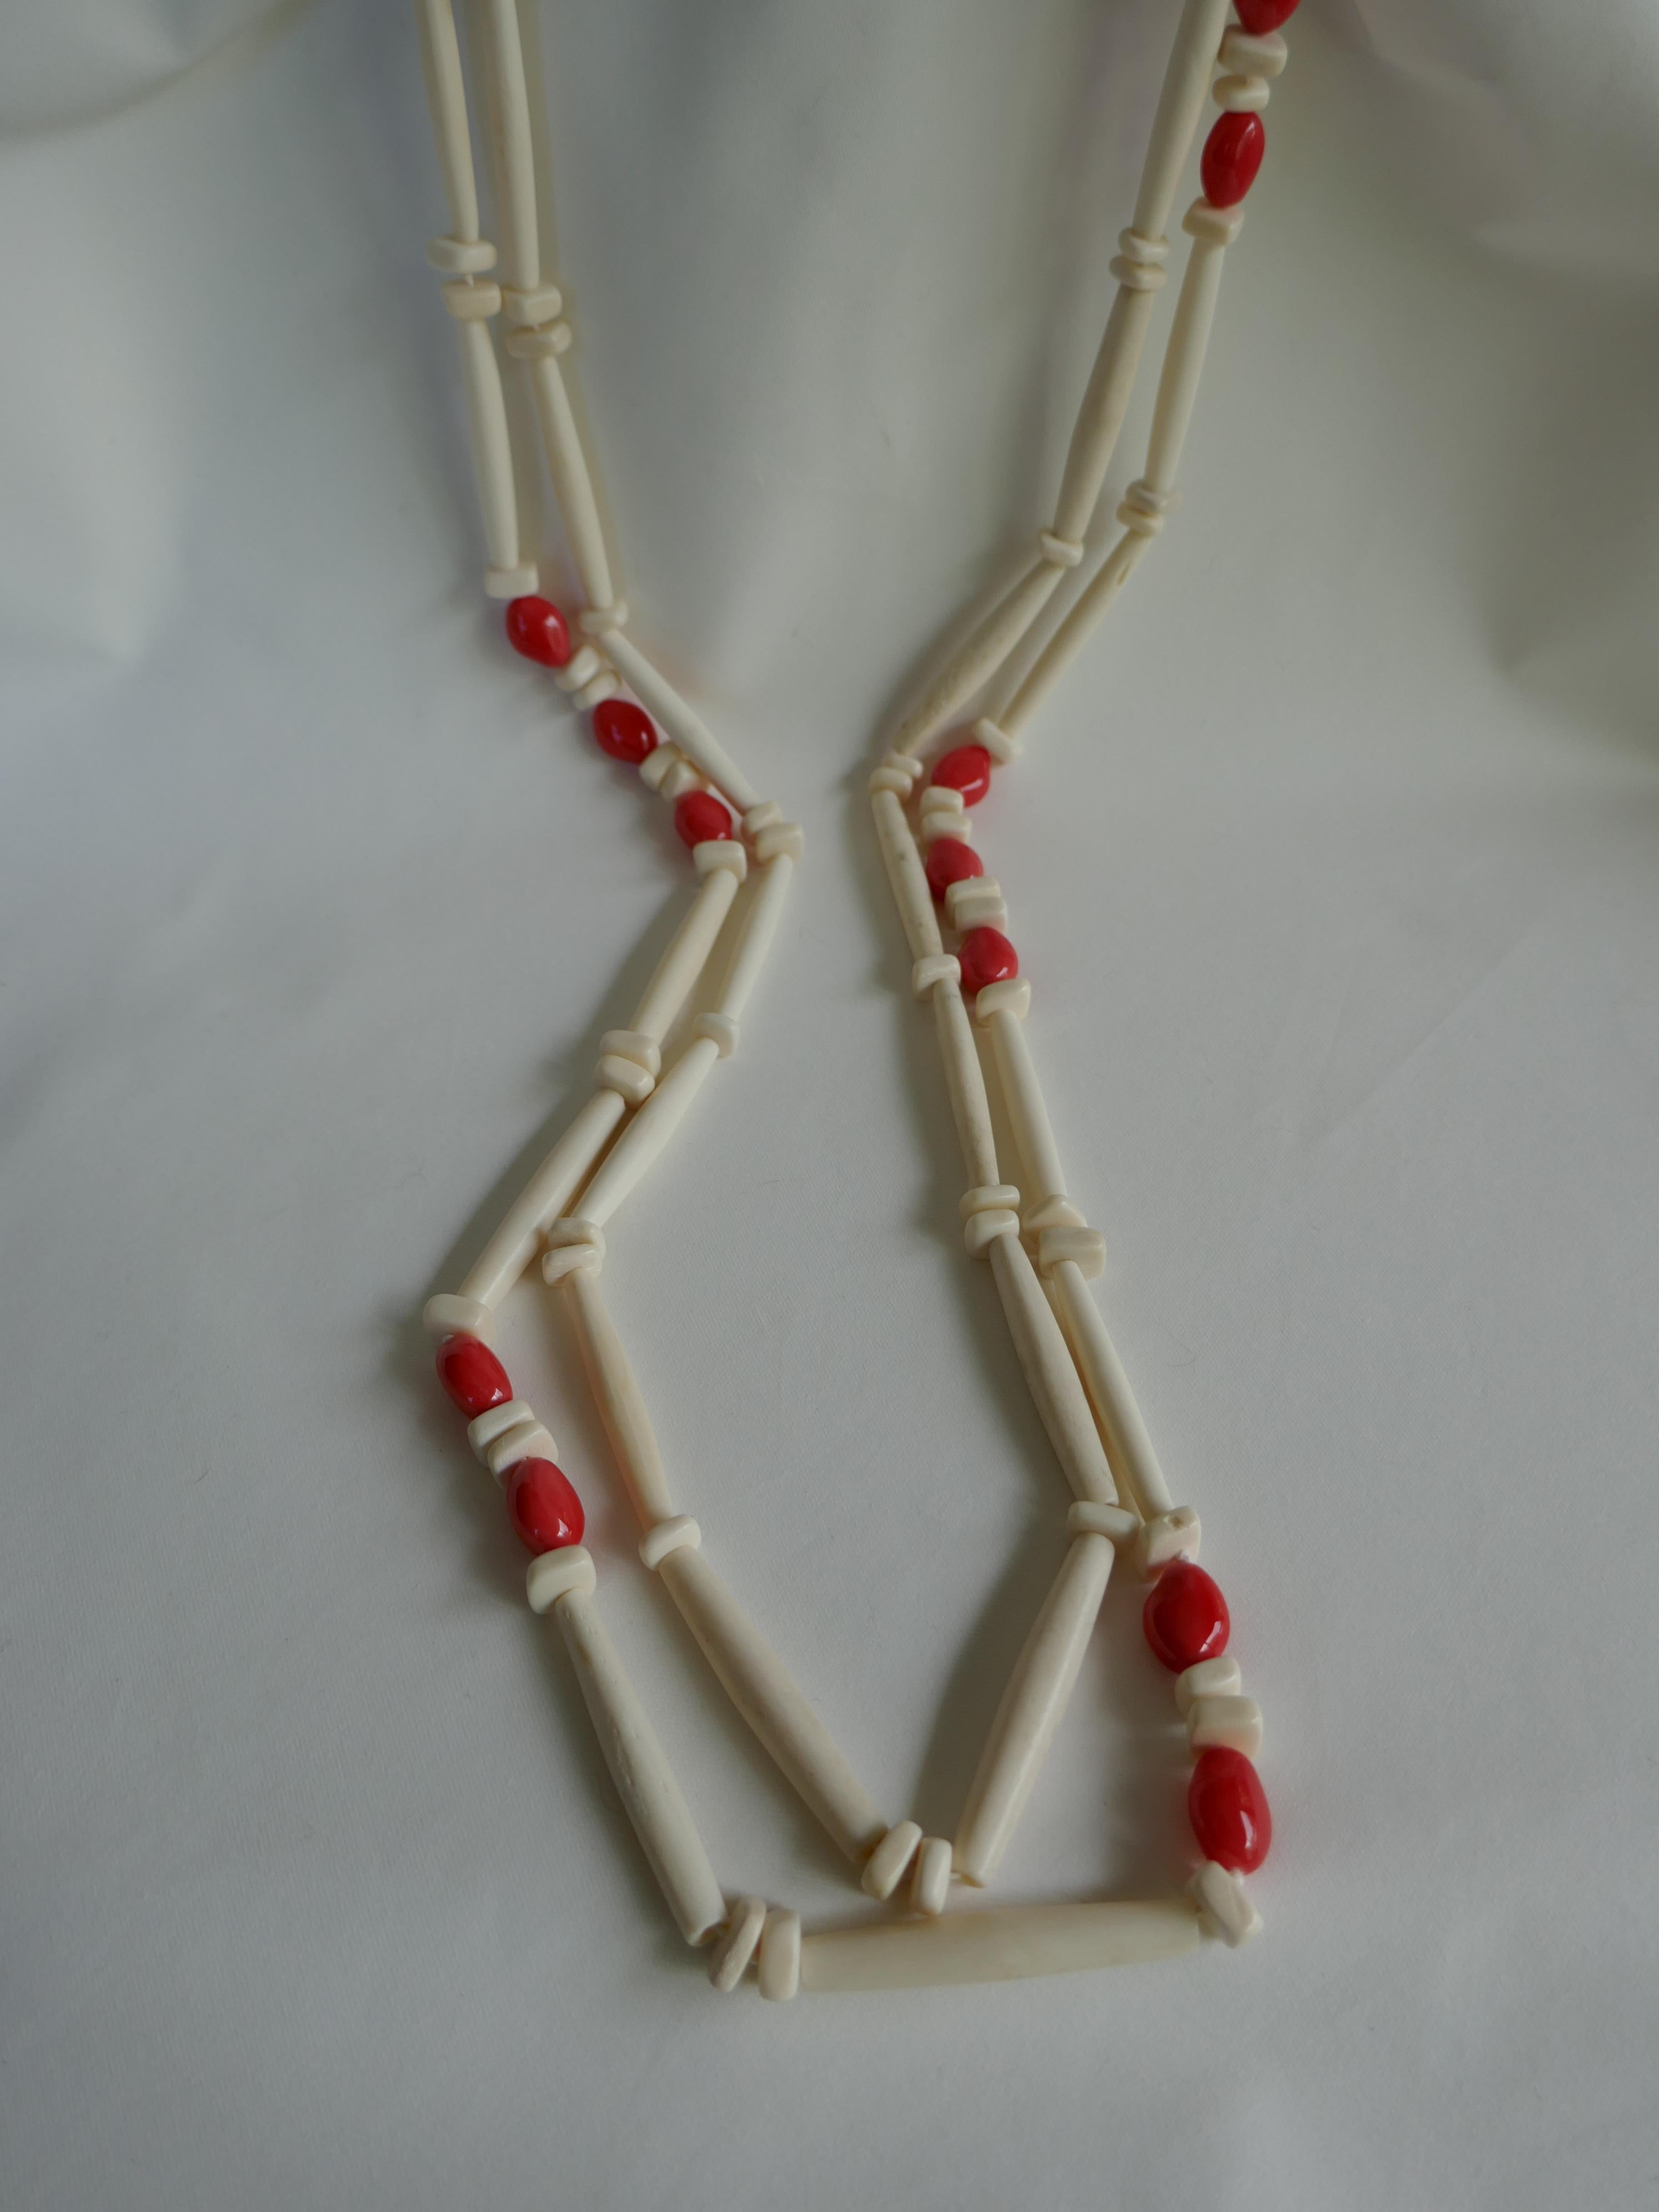 If you like unique pieces this is definitely one to own. This two strand necklace combines shell coral nuggets  with two shapes of bleached horn. The clasp is macramé and Rock Crystal Nuggets. The necklaces are individual necklaces that may be worn